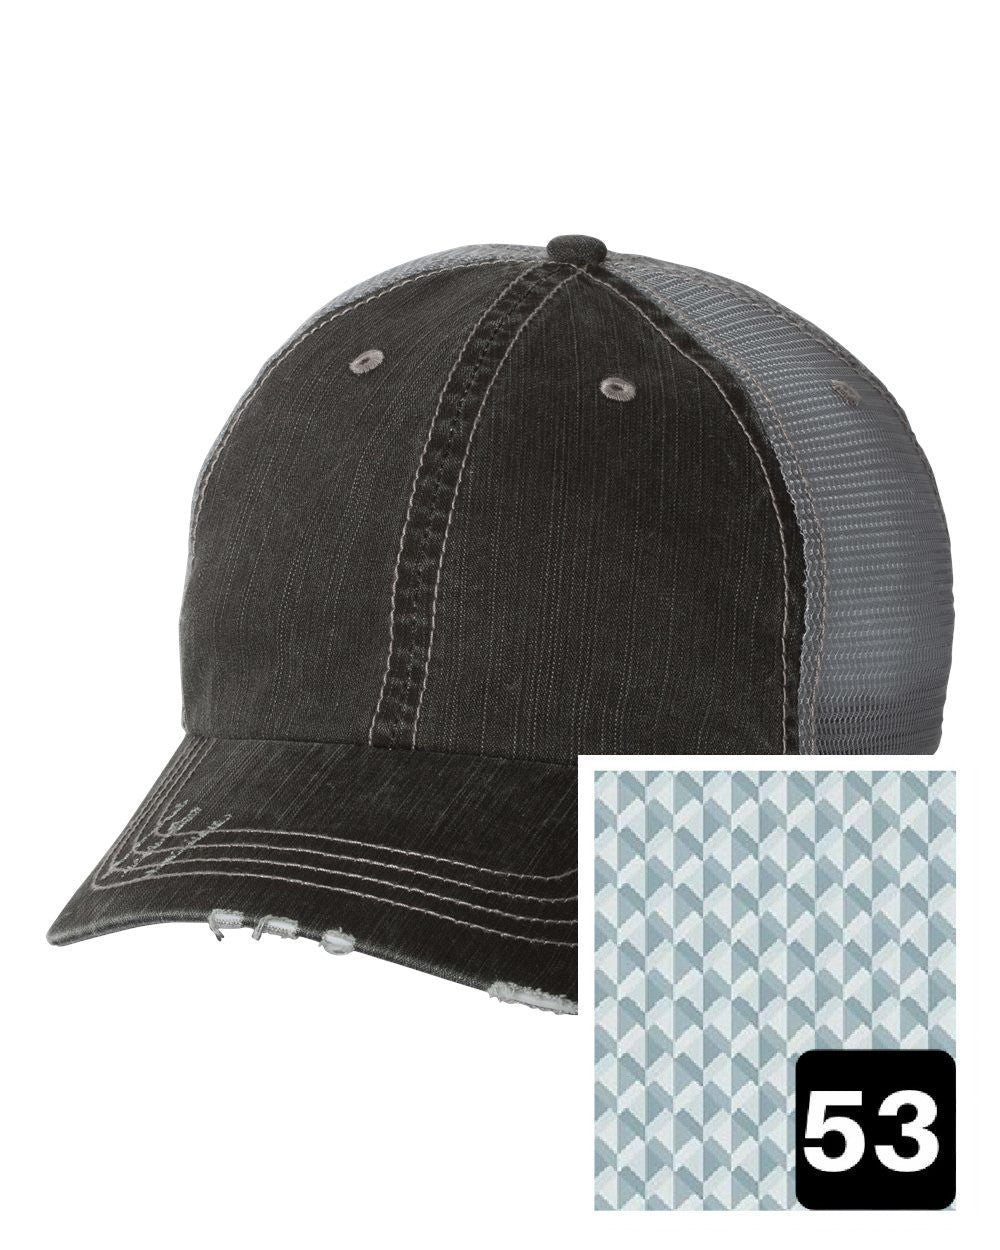 gray distressed trucker hat with multi-color stripe fabric state of Mississippi